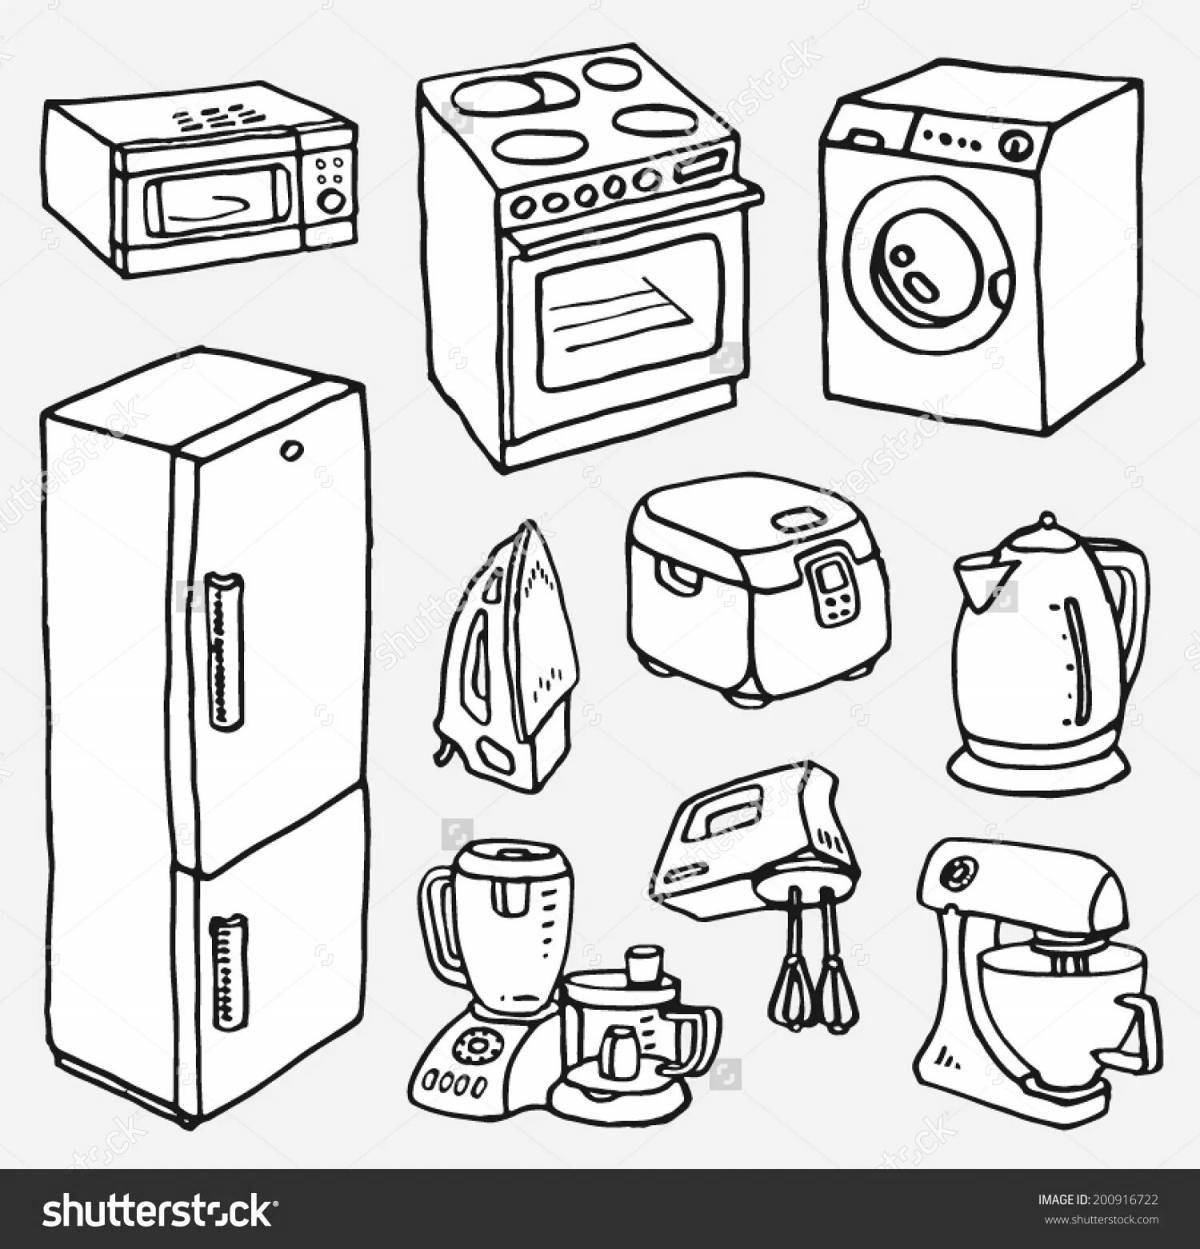 Coloring book bold household appliances